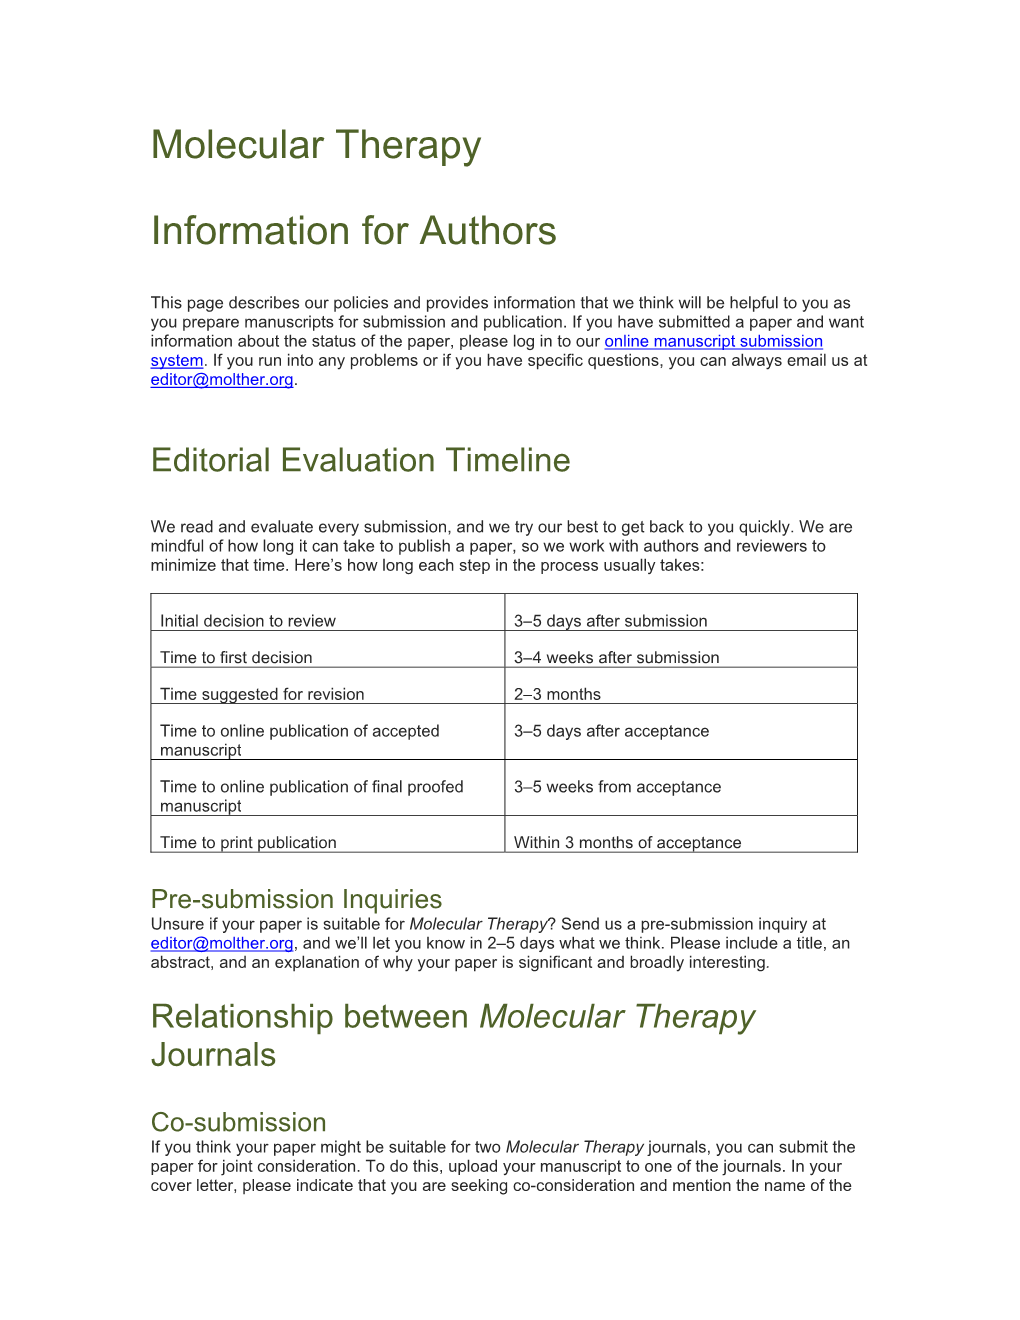 Molecular Therapy Information for Authors